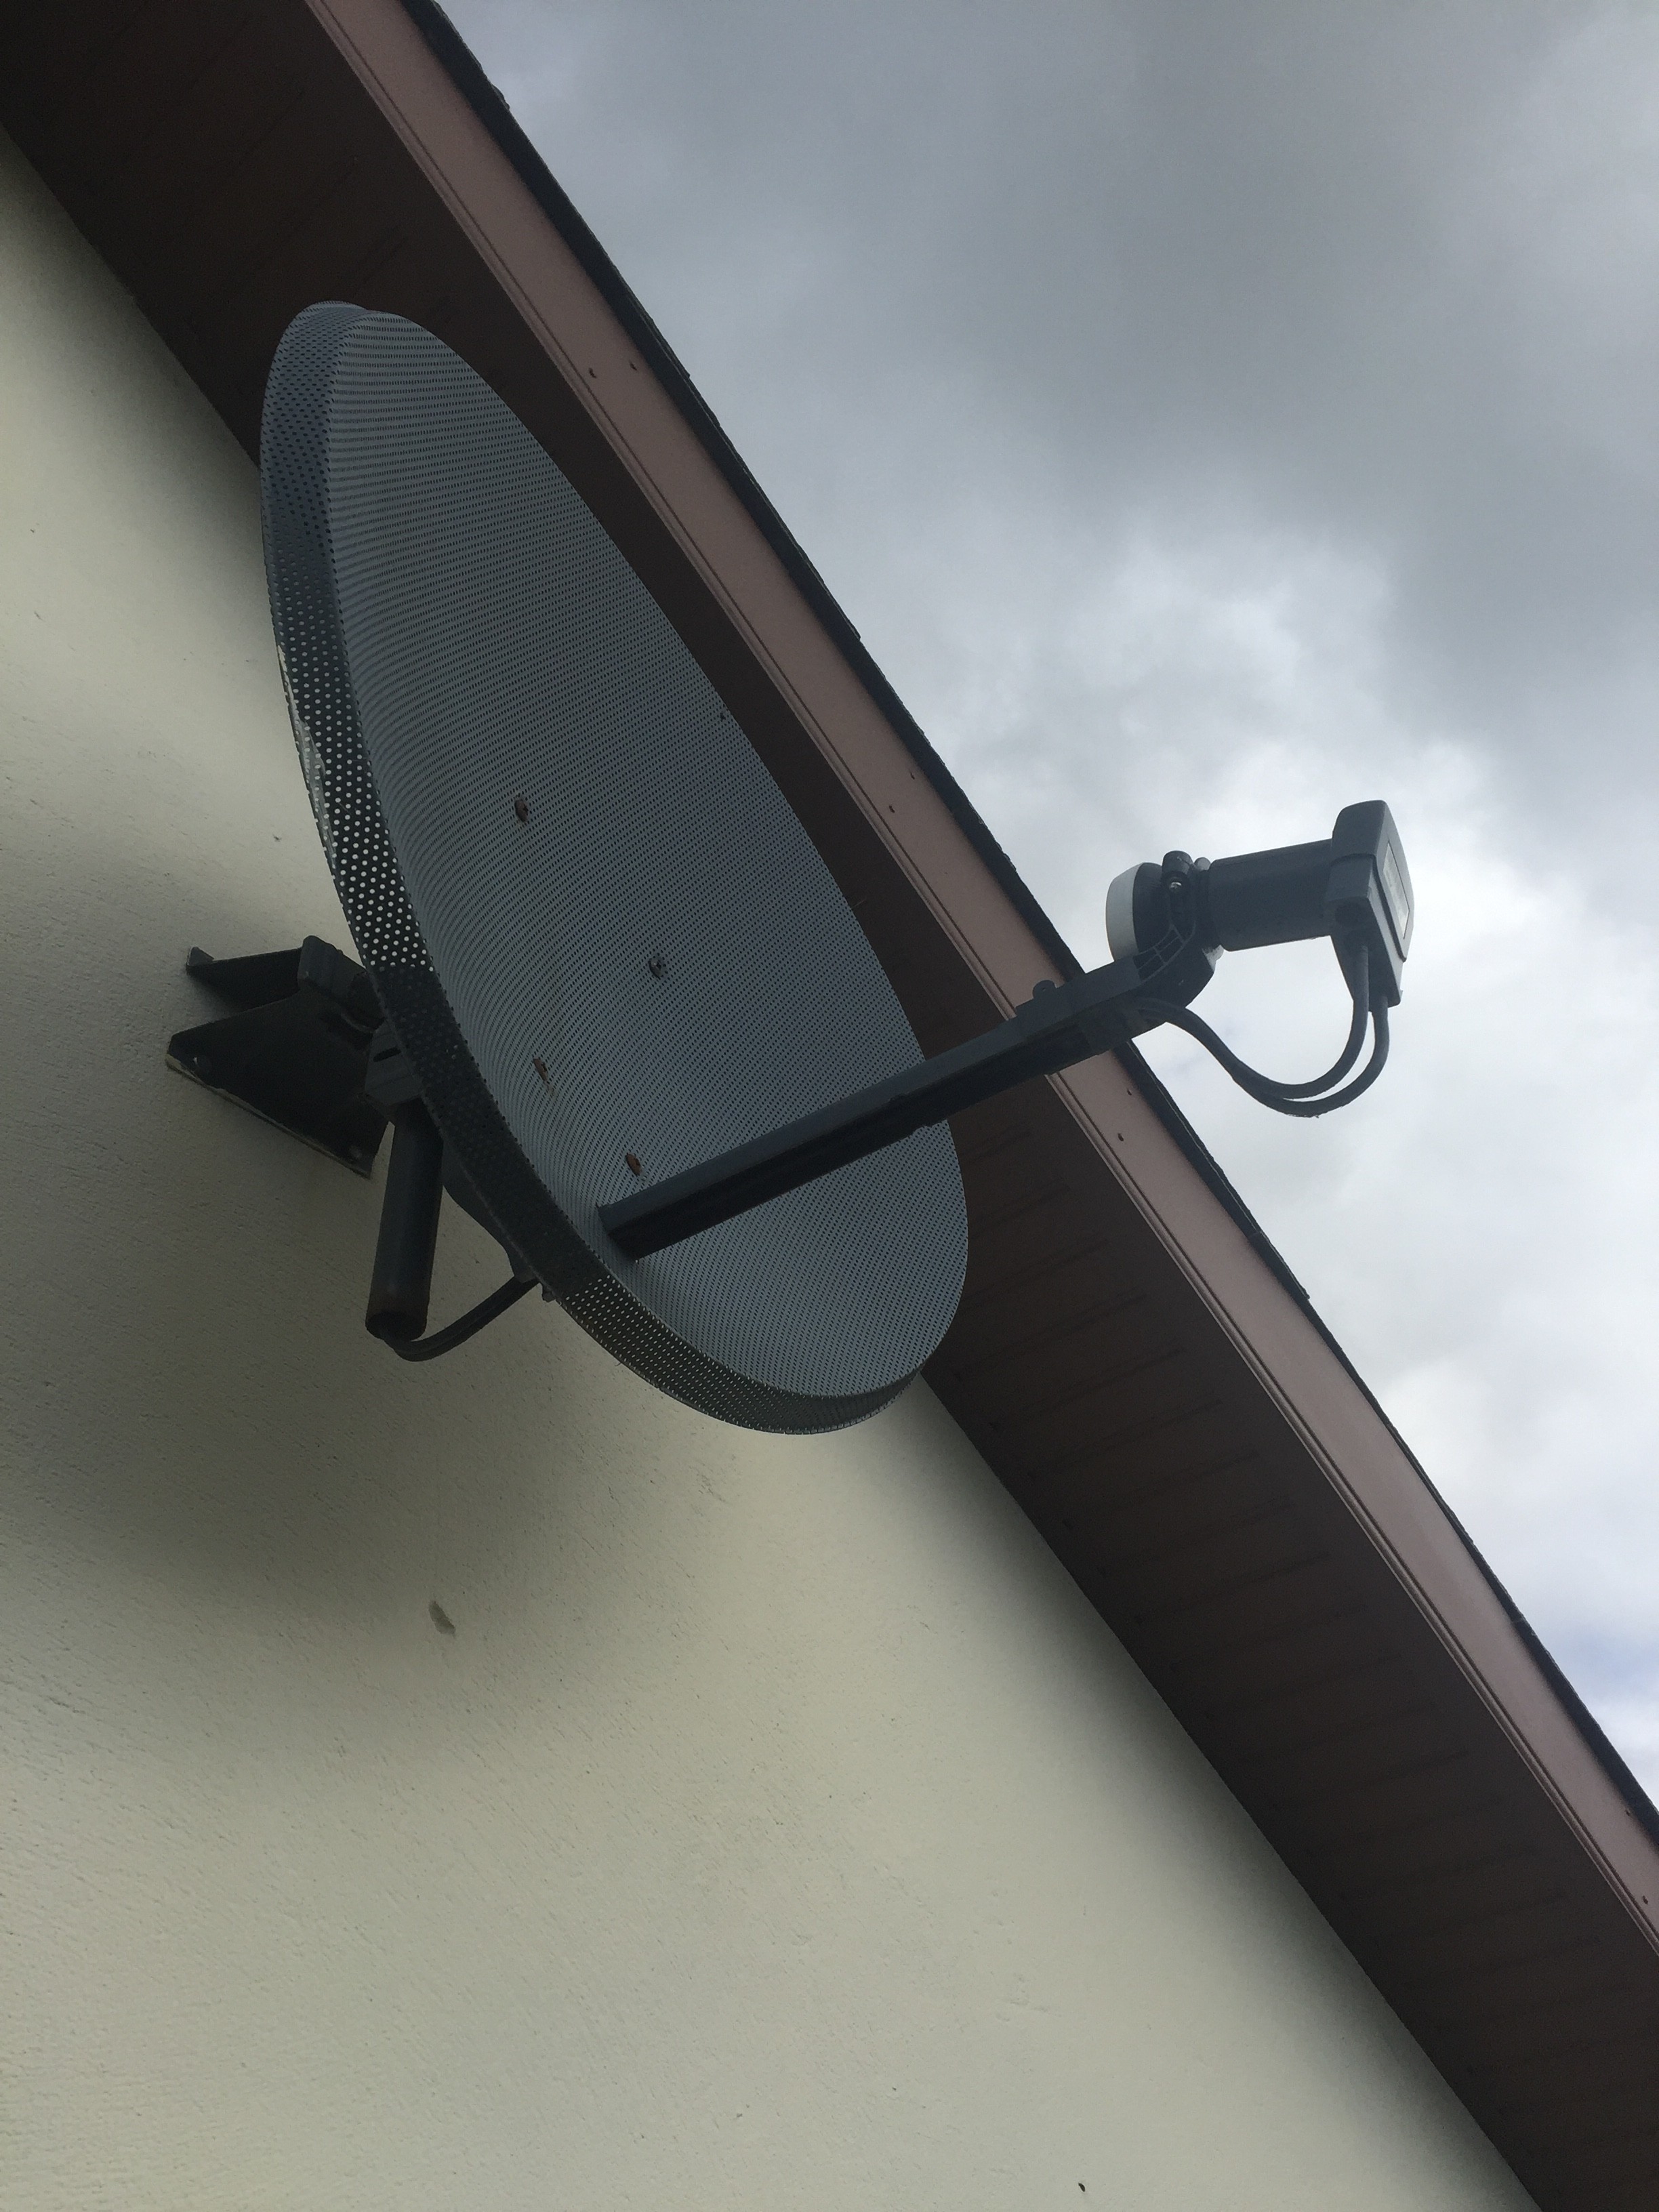 Satellite dish fitted in Ballybay